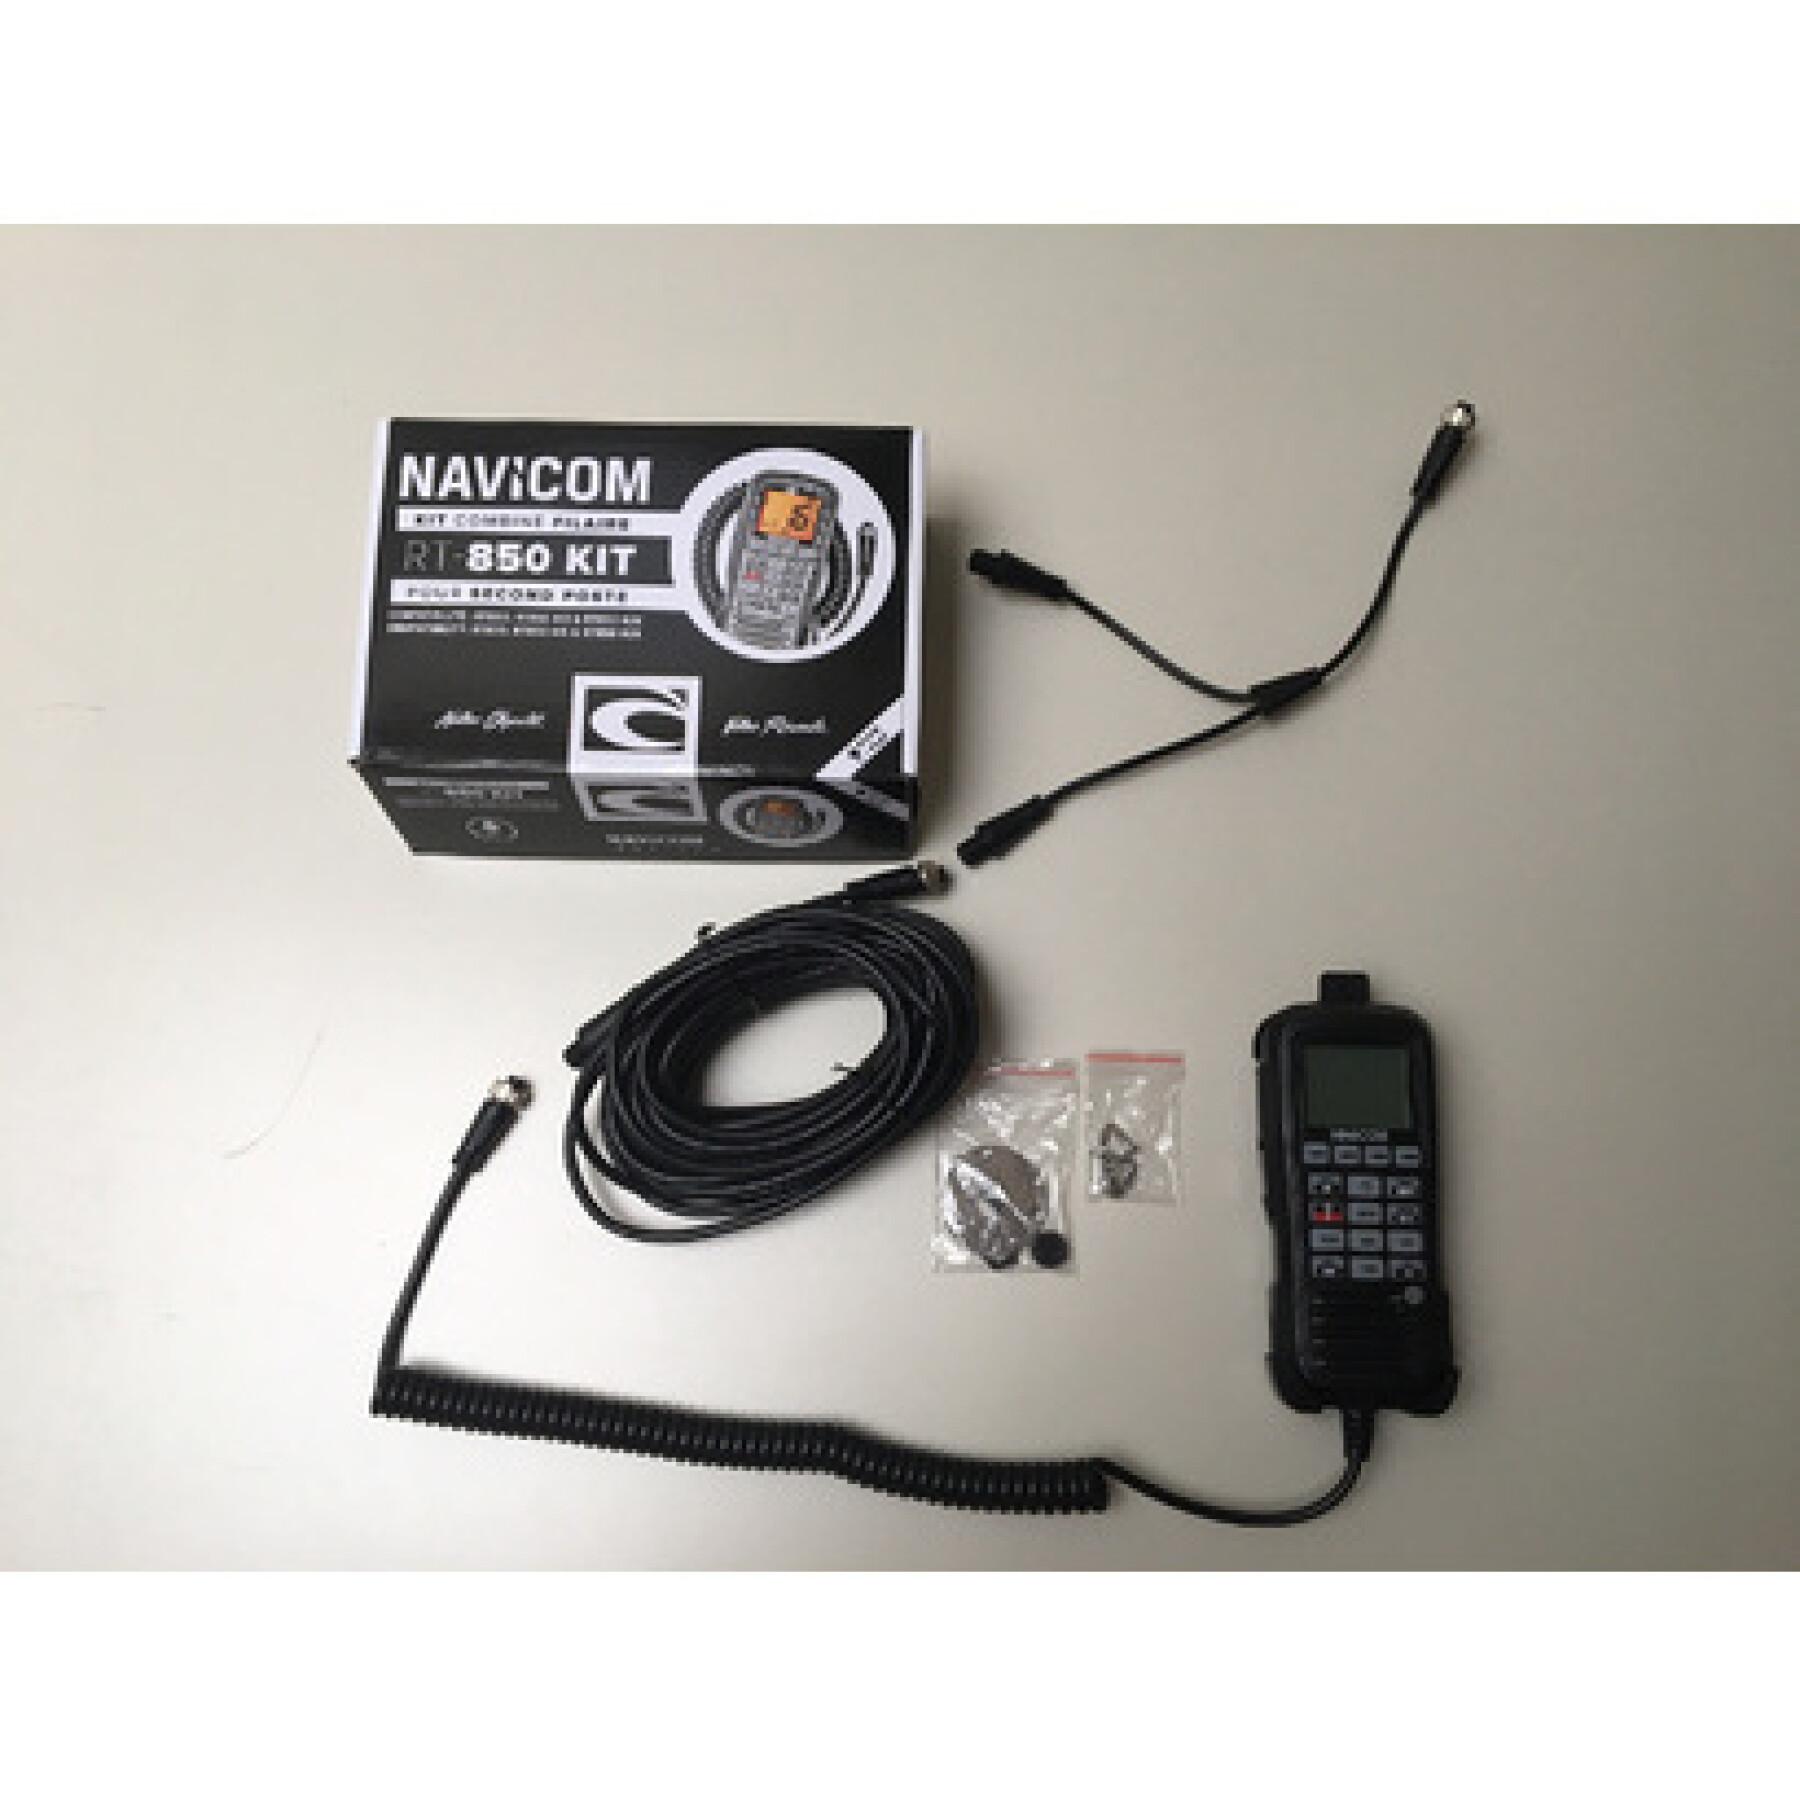 Dual station handset kit with 12 meters of cable Navicom RT850